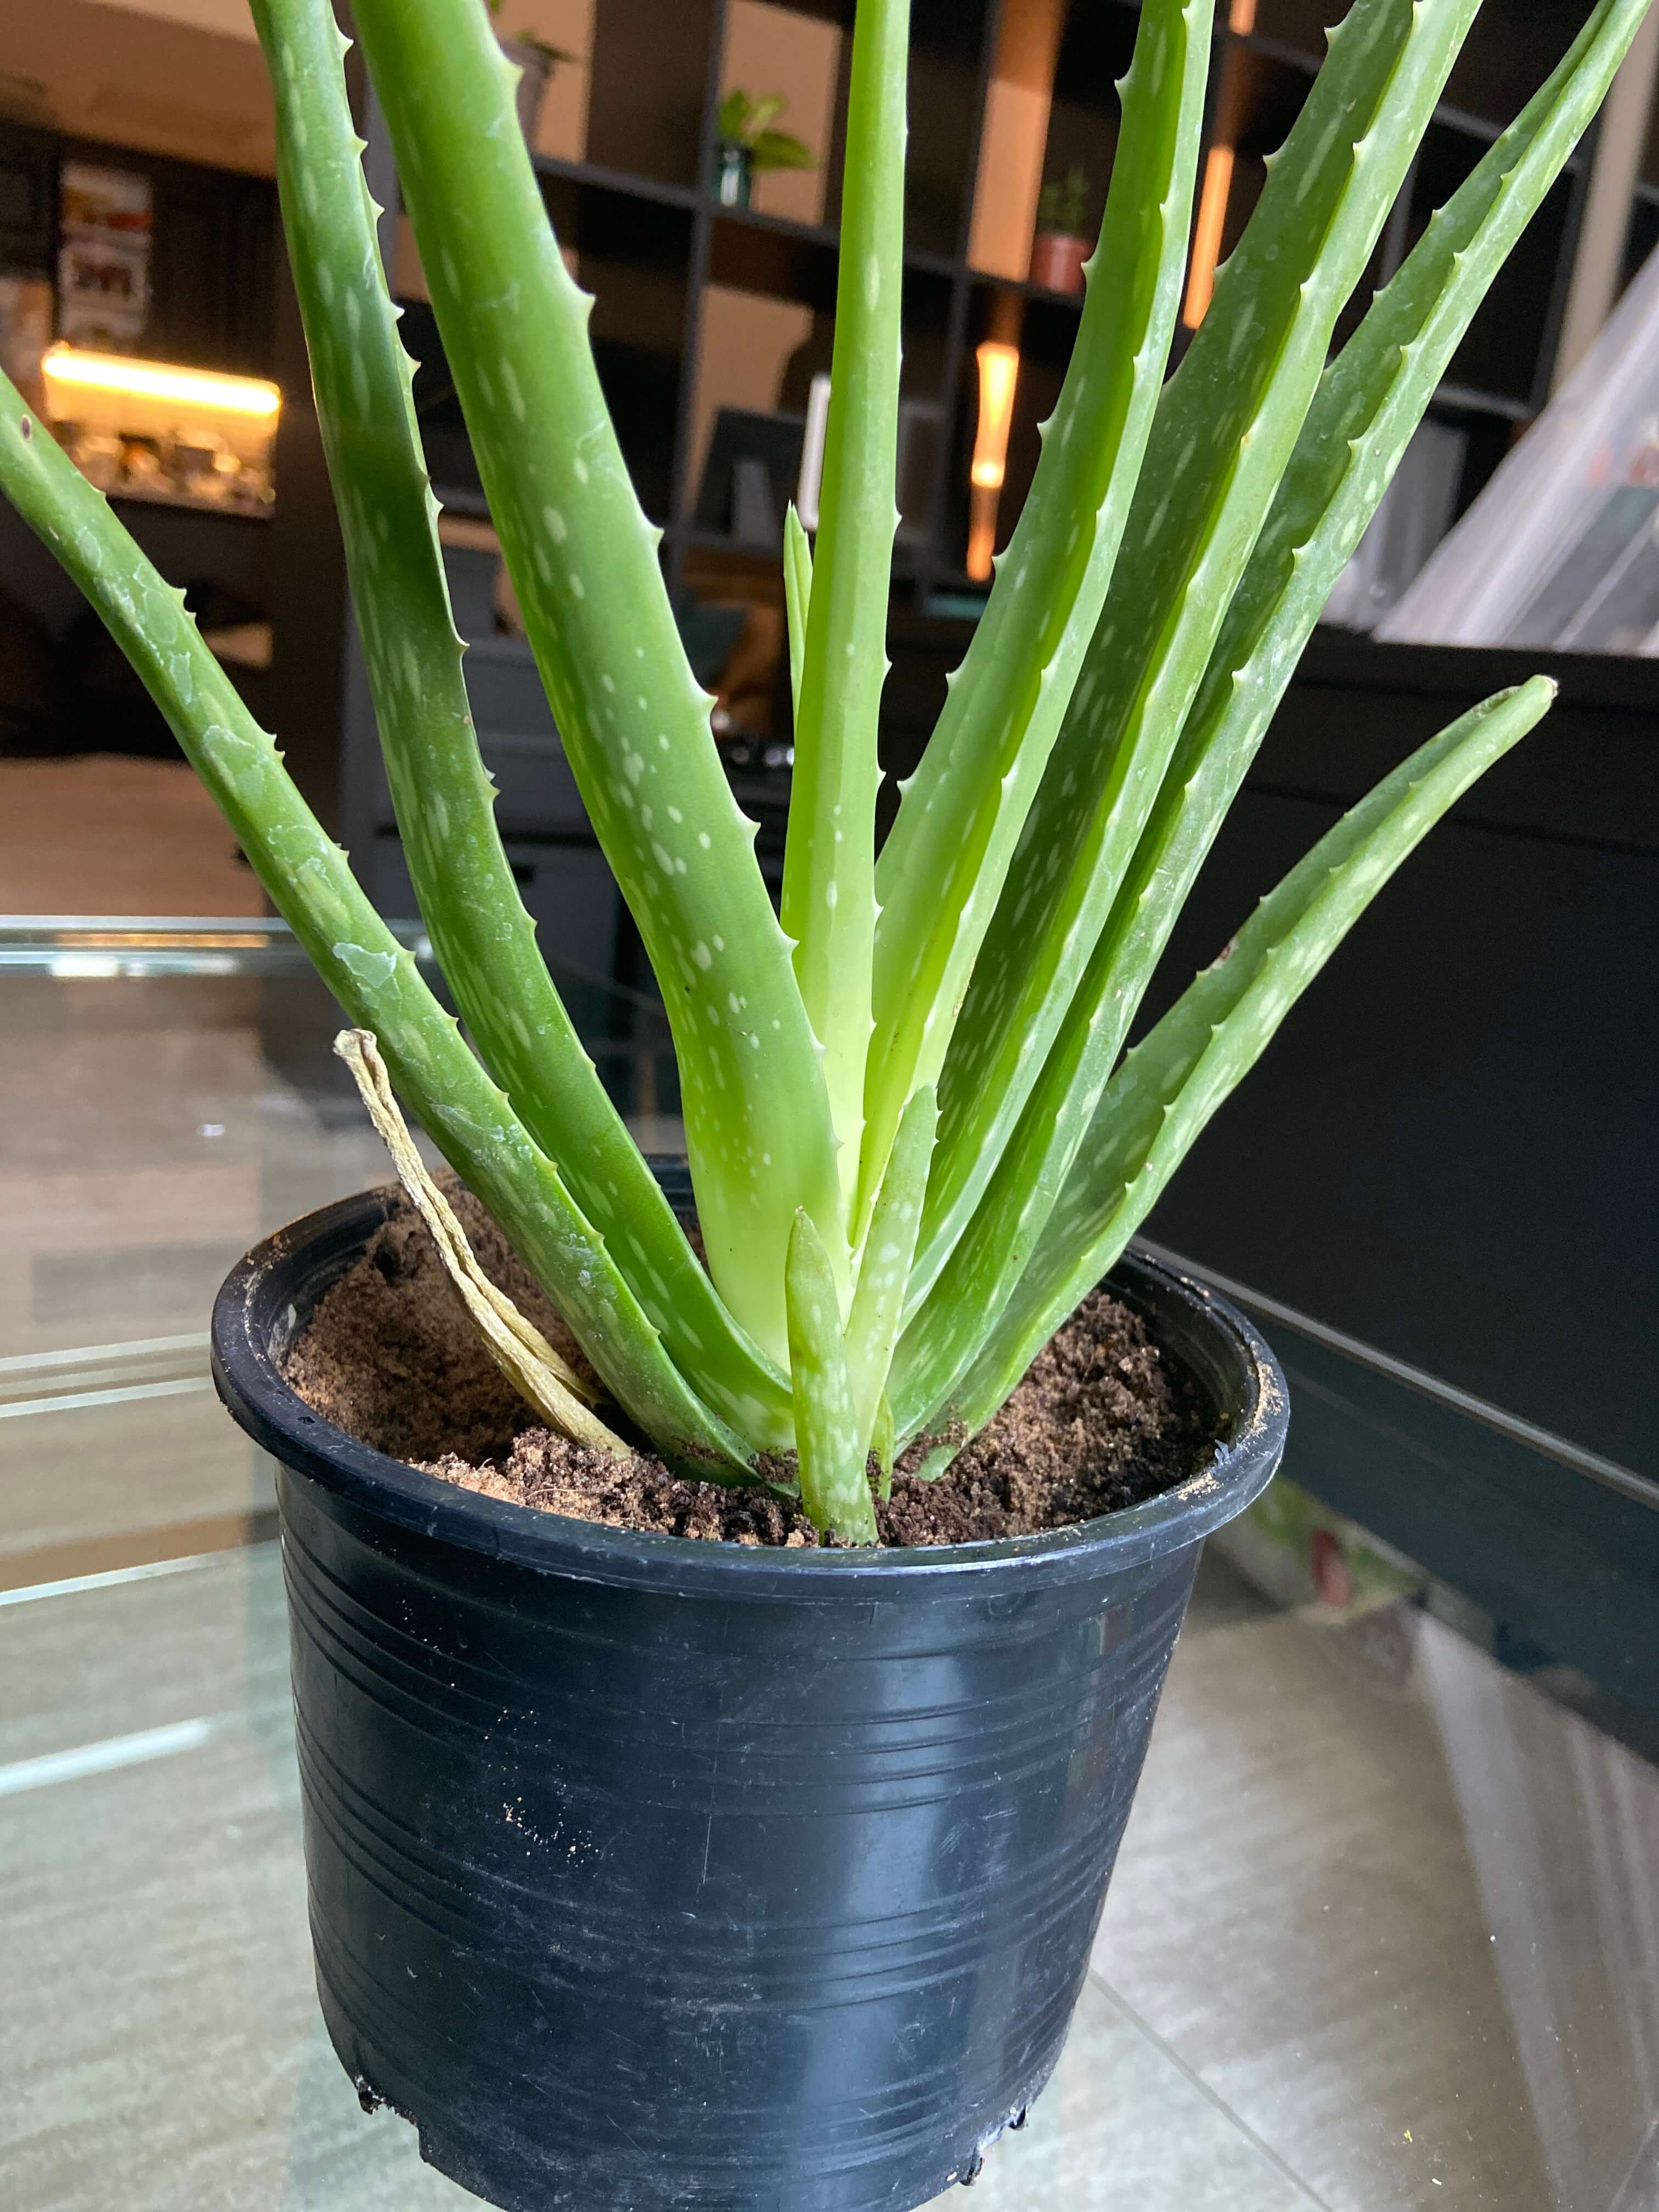 How best to take care of my aloe plant